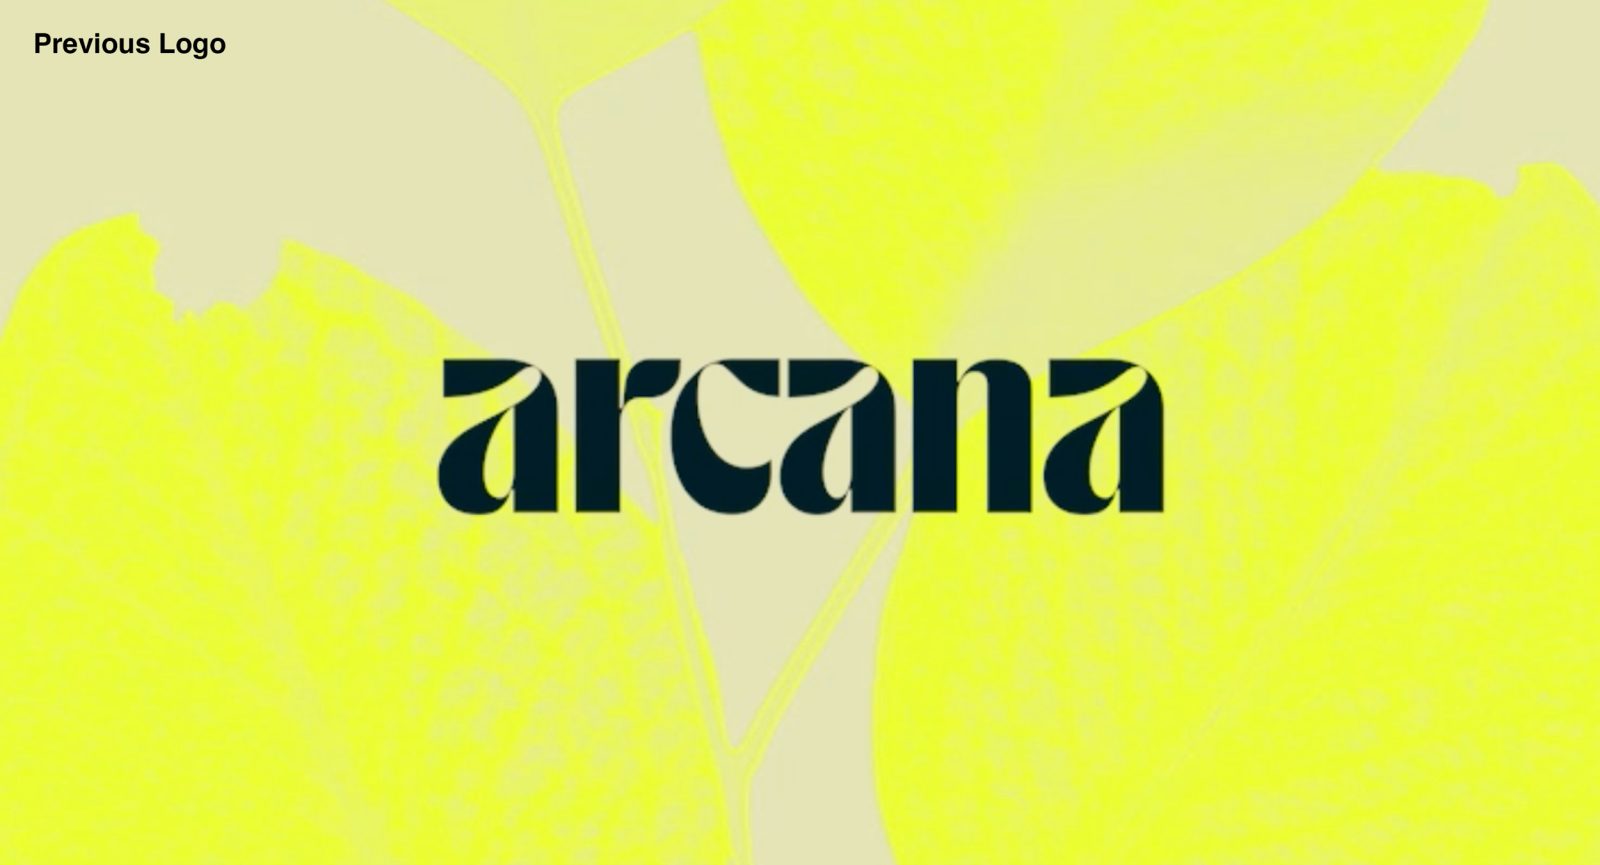 Student Concept for Arcana Brand Redesign